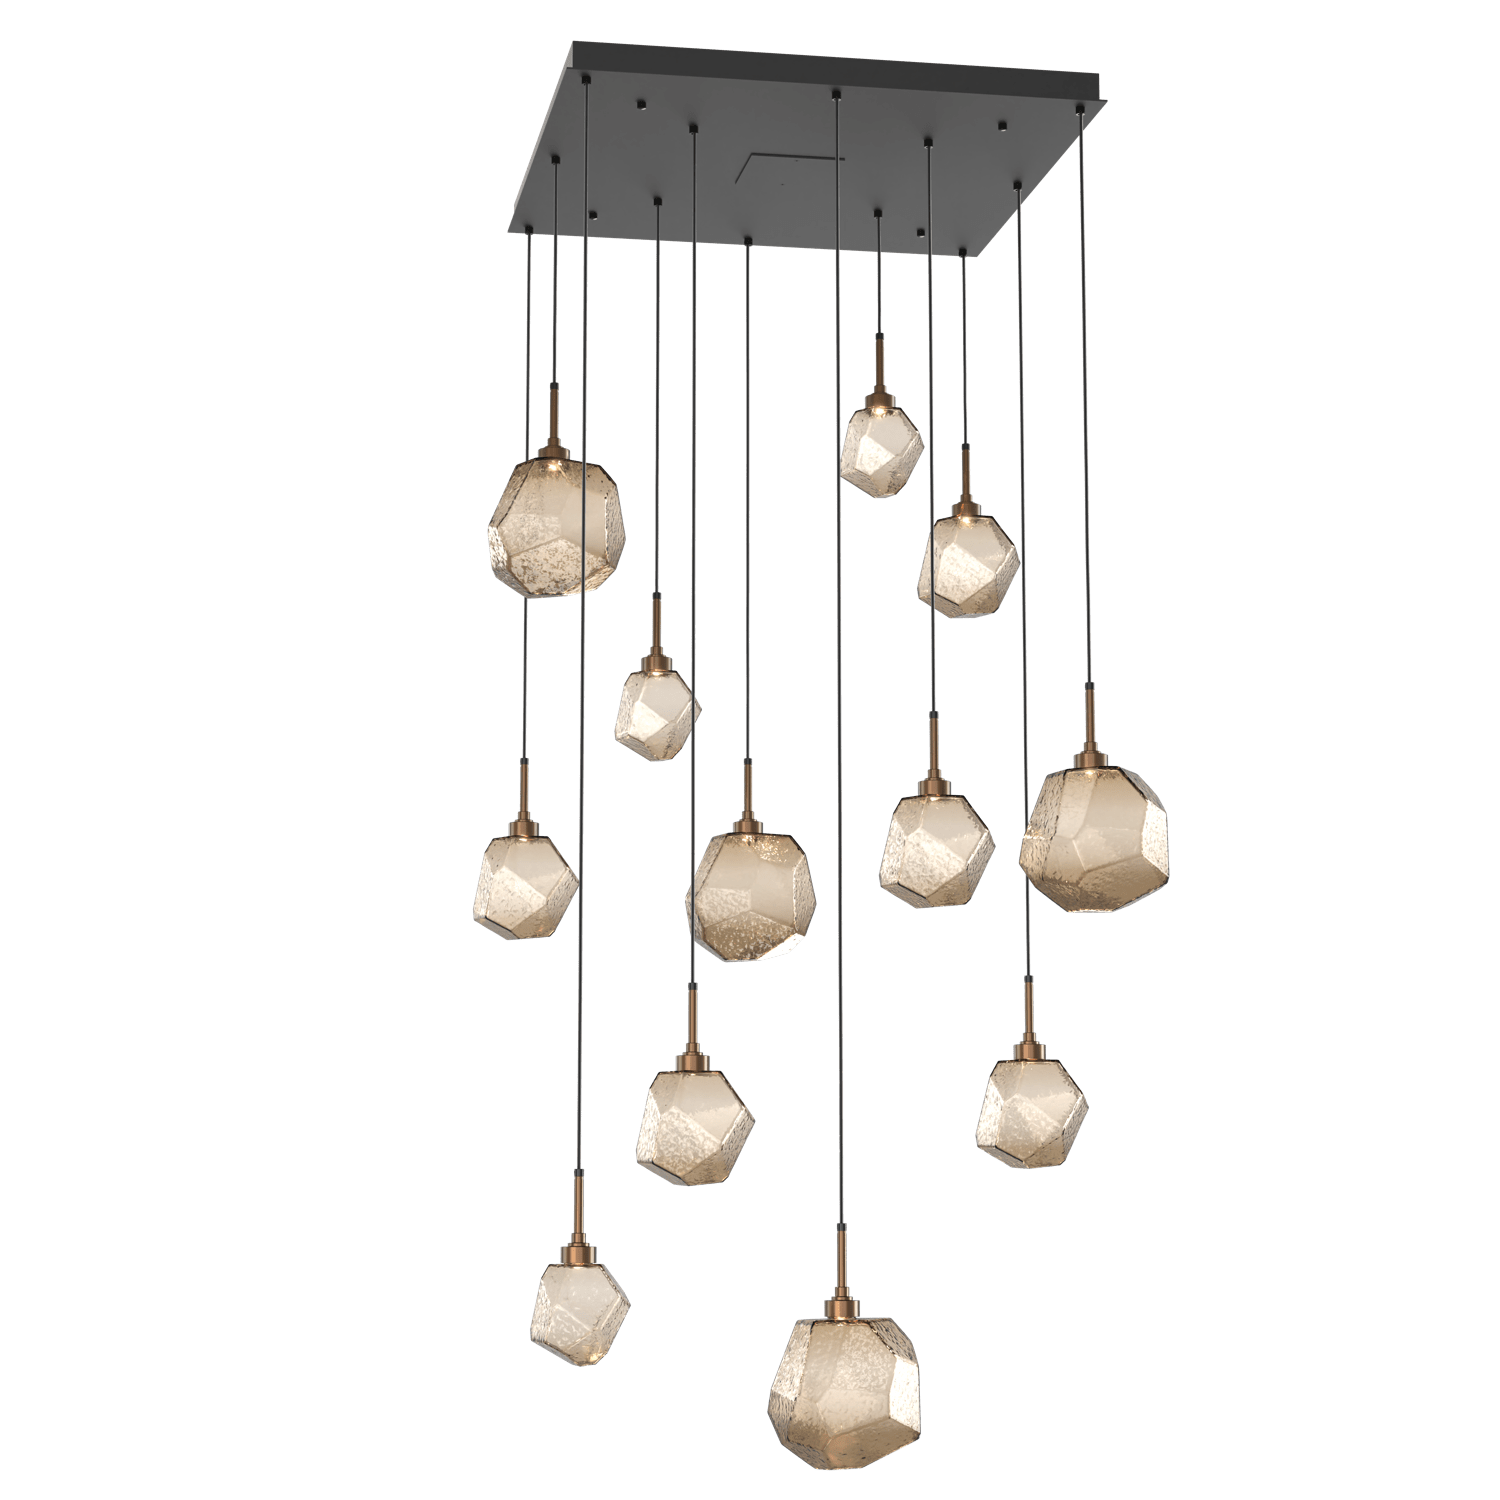 CHB0039-12-MB-B-Hammerton-Studio-Gem-12-light-square-pendant-chandelier-with-matte-black-finish-and-bronze-blown-glass-shades-and-LED-lamping